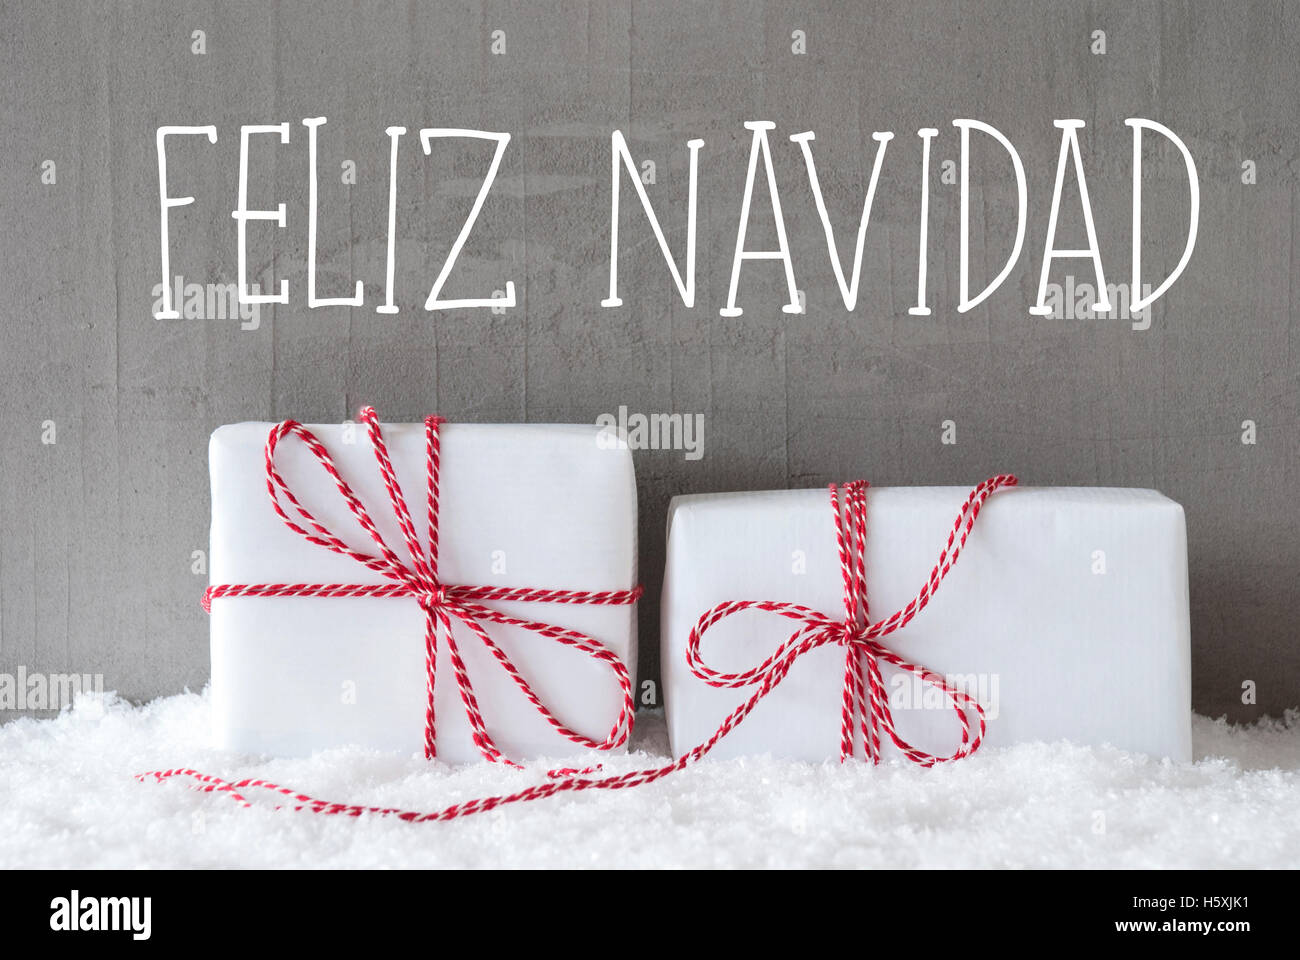 Two Gifts With Snow, Feliz Navidad Means Merry Christmas Stock Photo